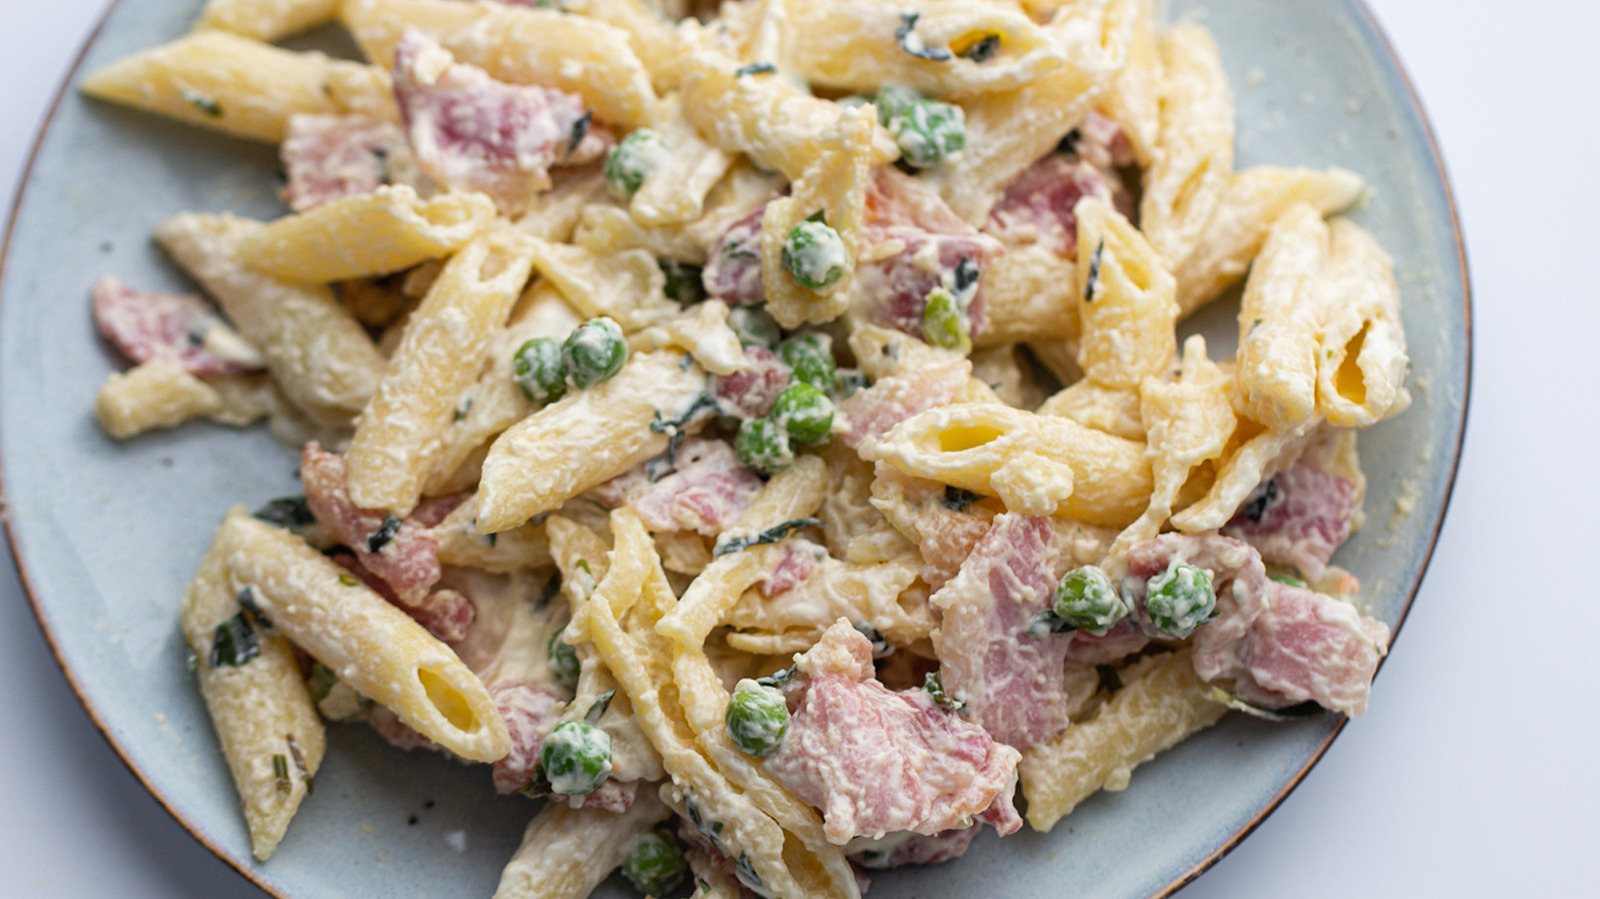 Ditalini Pasta with Bacon and Peas - The Recipe Rebel